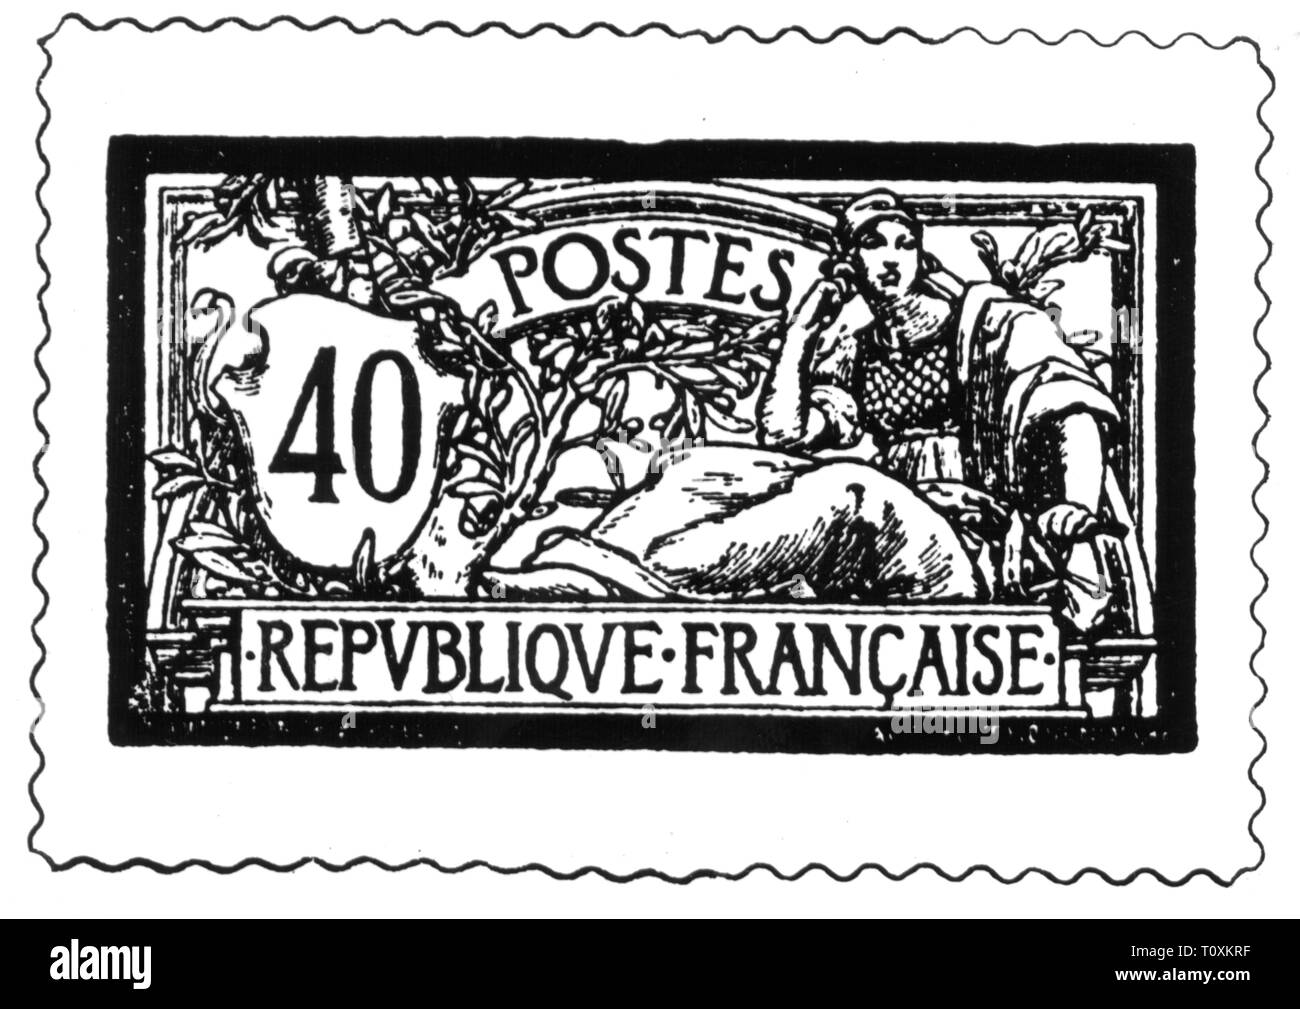 La poste, timbres, France, 40 centimes, 1920, timbre-Additional-Rights Clearance-Info-Not-Available- Banque D'Images